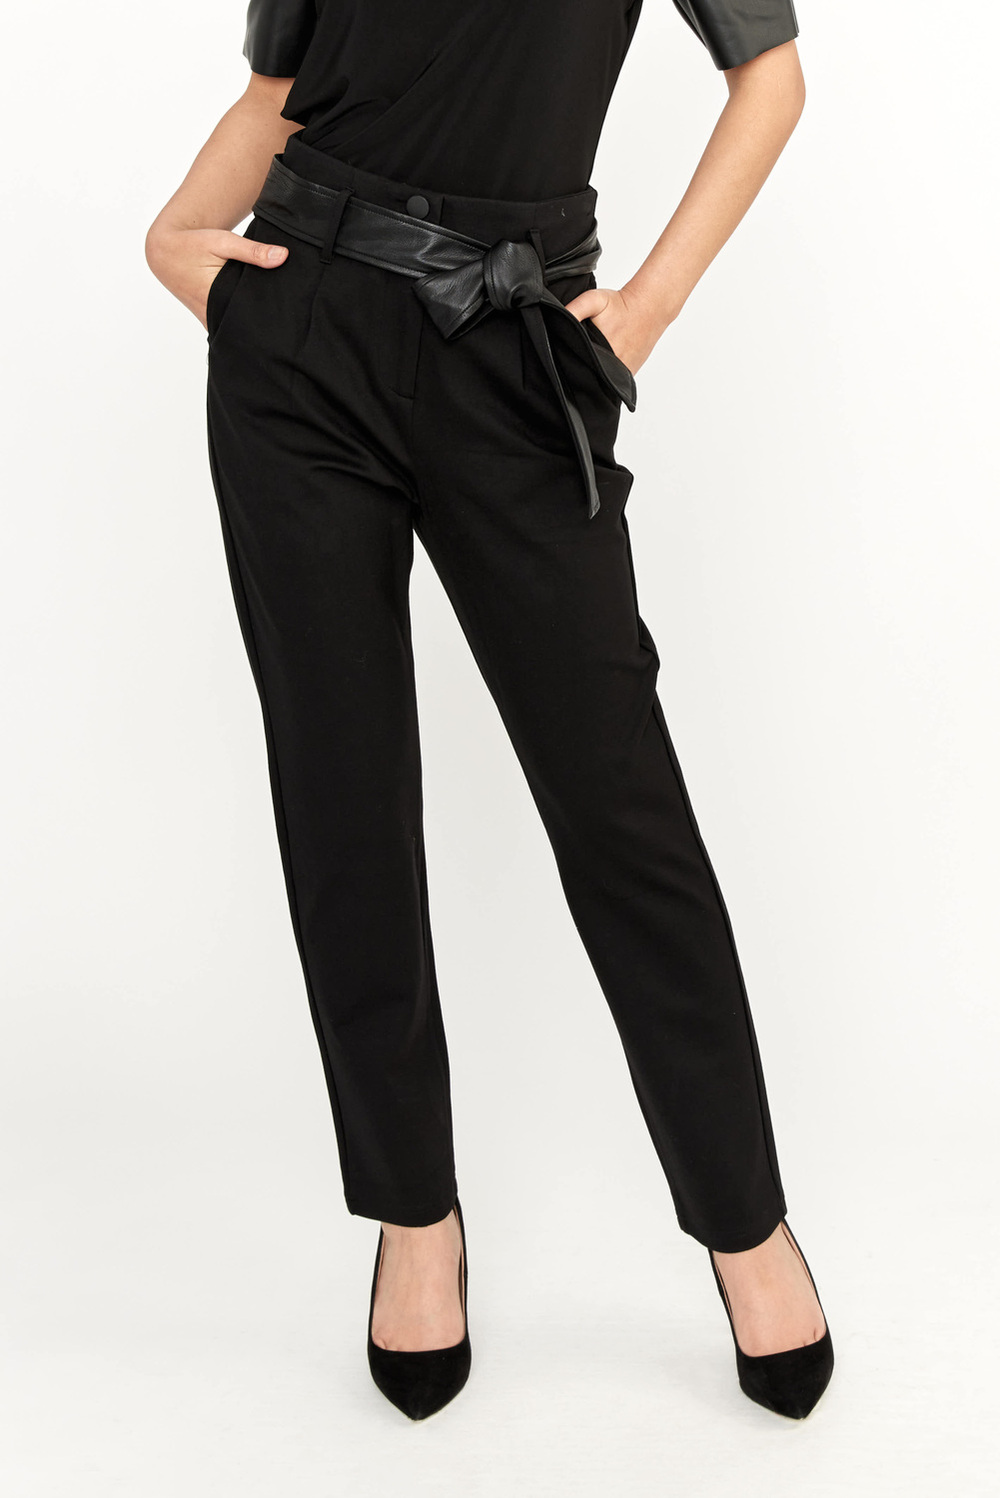 Pants with Knotted Belt Style 233919U. Black